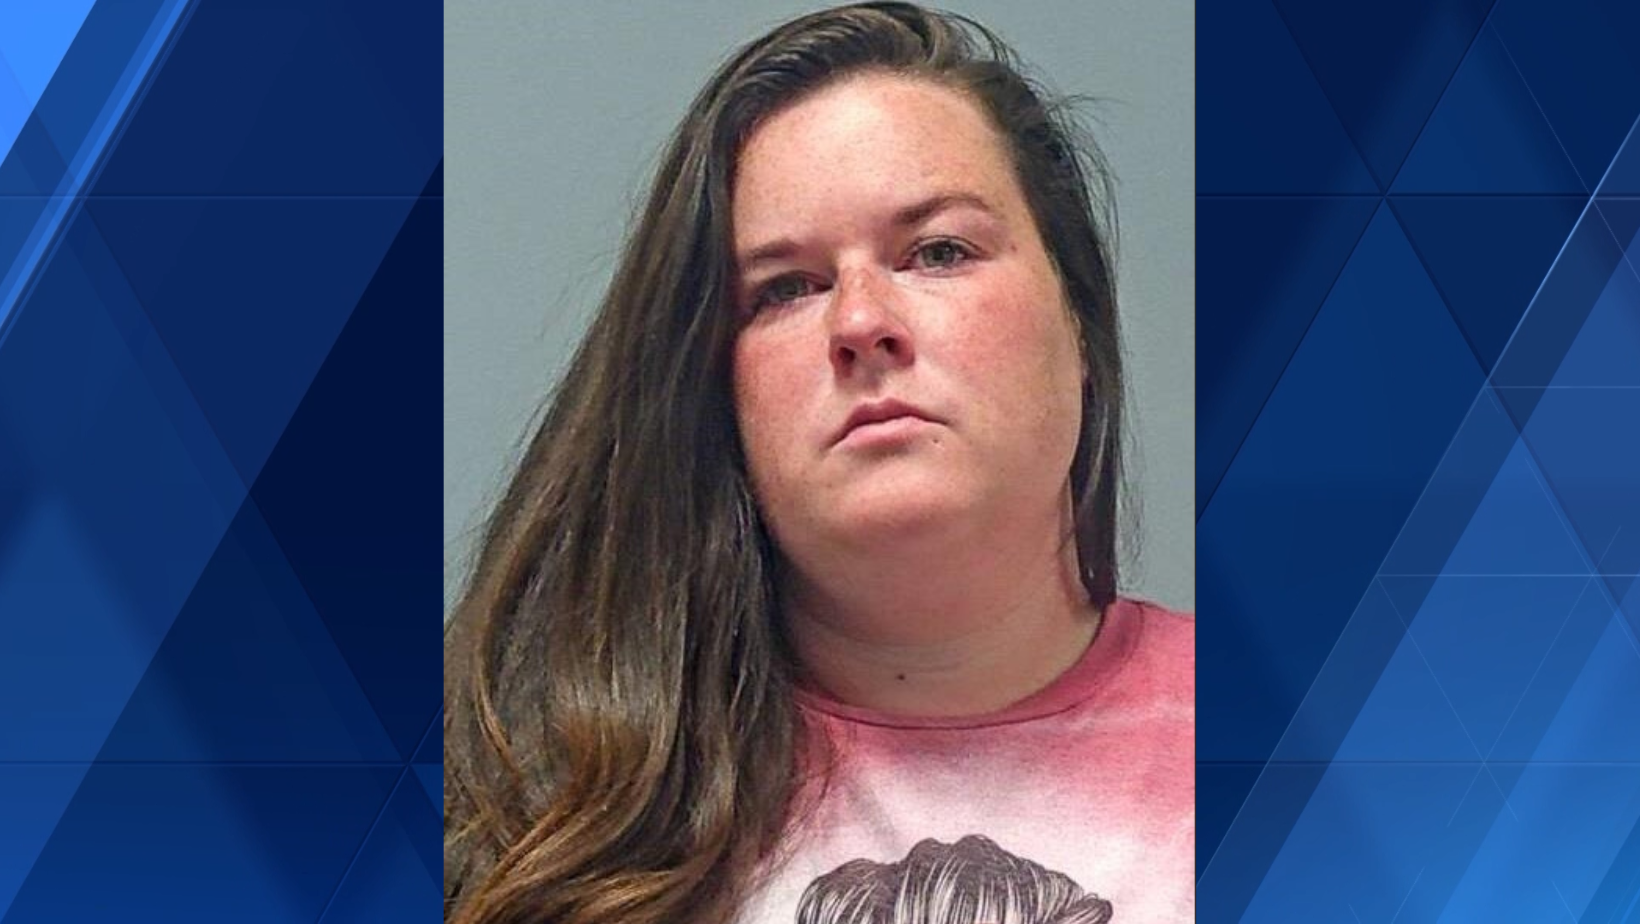 Babysitter indicted, accused of causing physical harm to 20-month-old baby